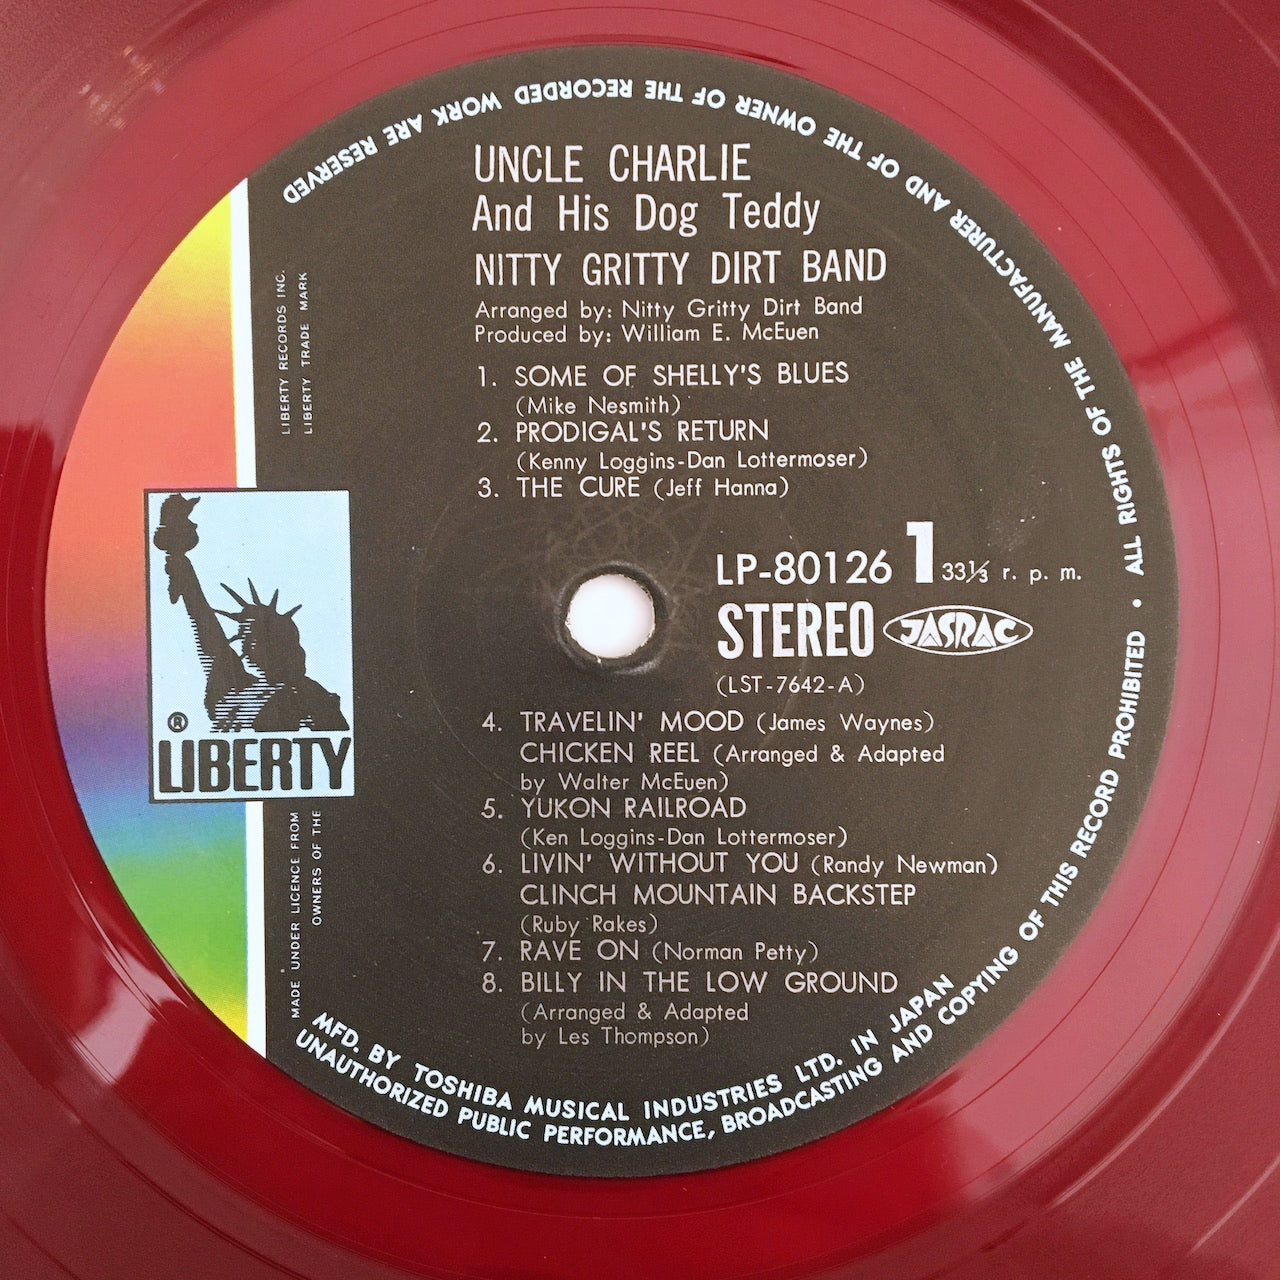 LP/ NITTY GRITTY DIRT BAND / UNCLE CHARLIE & HIS DOG TEDDY / 国内盤 帯・ライナー付き LIBERTY LP-80126